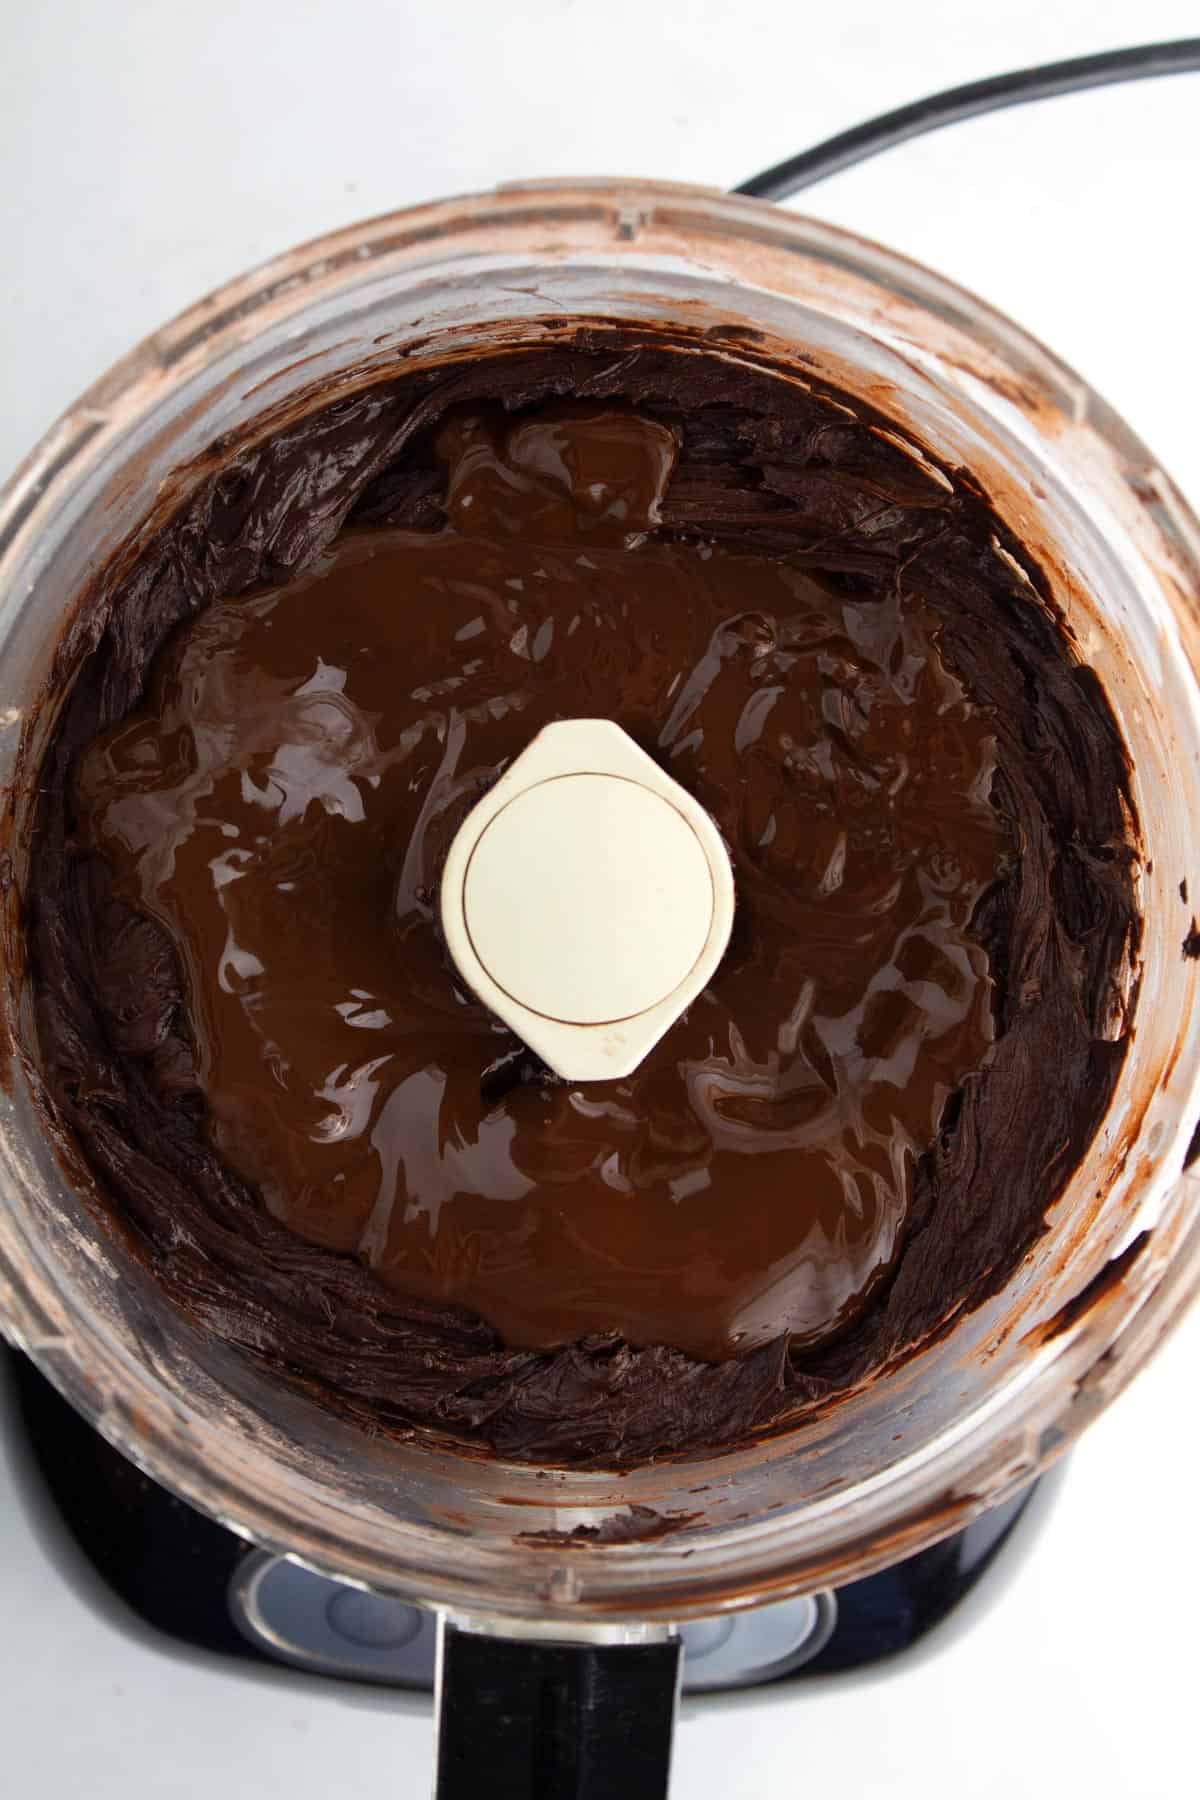 Chocolate frosting in a food processor with melted chocolate poured on top.